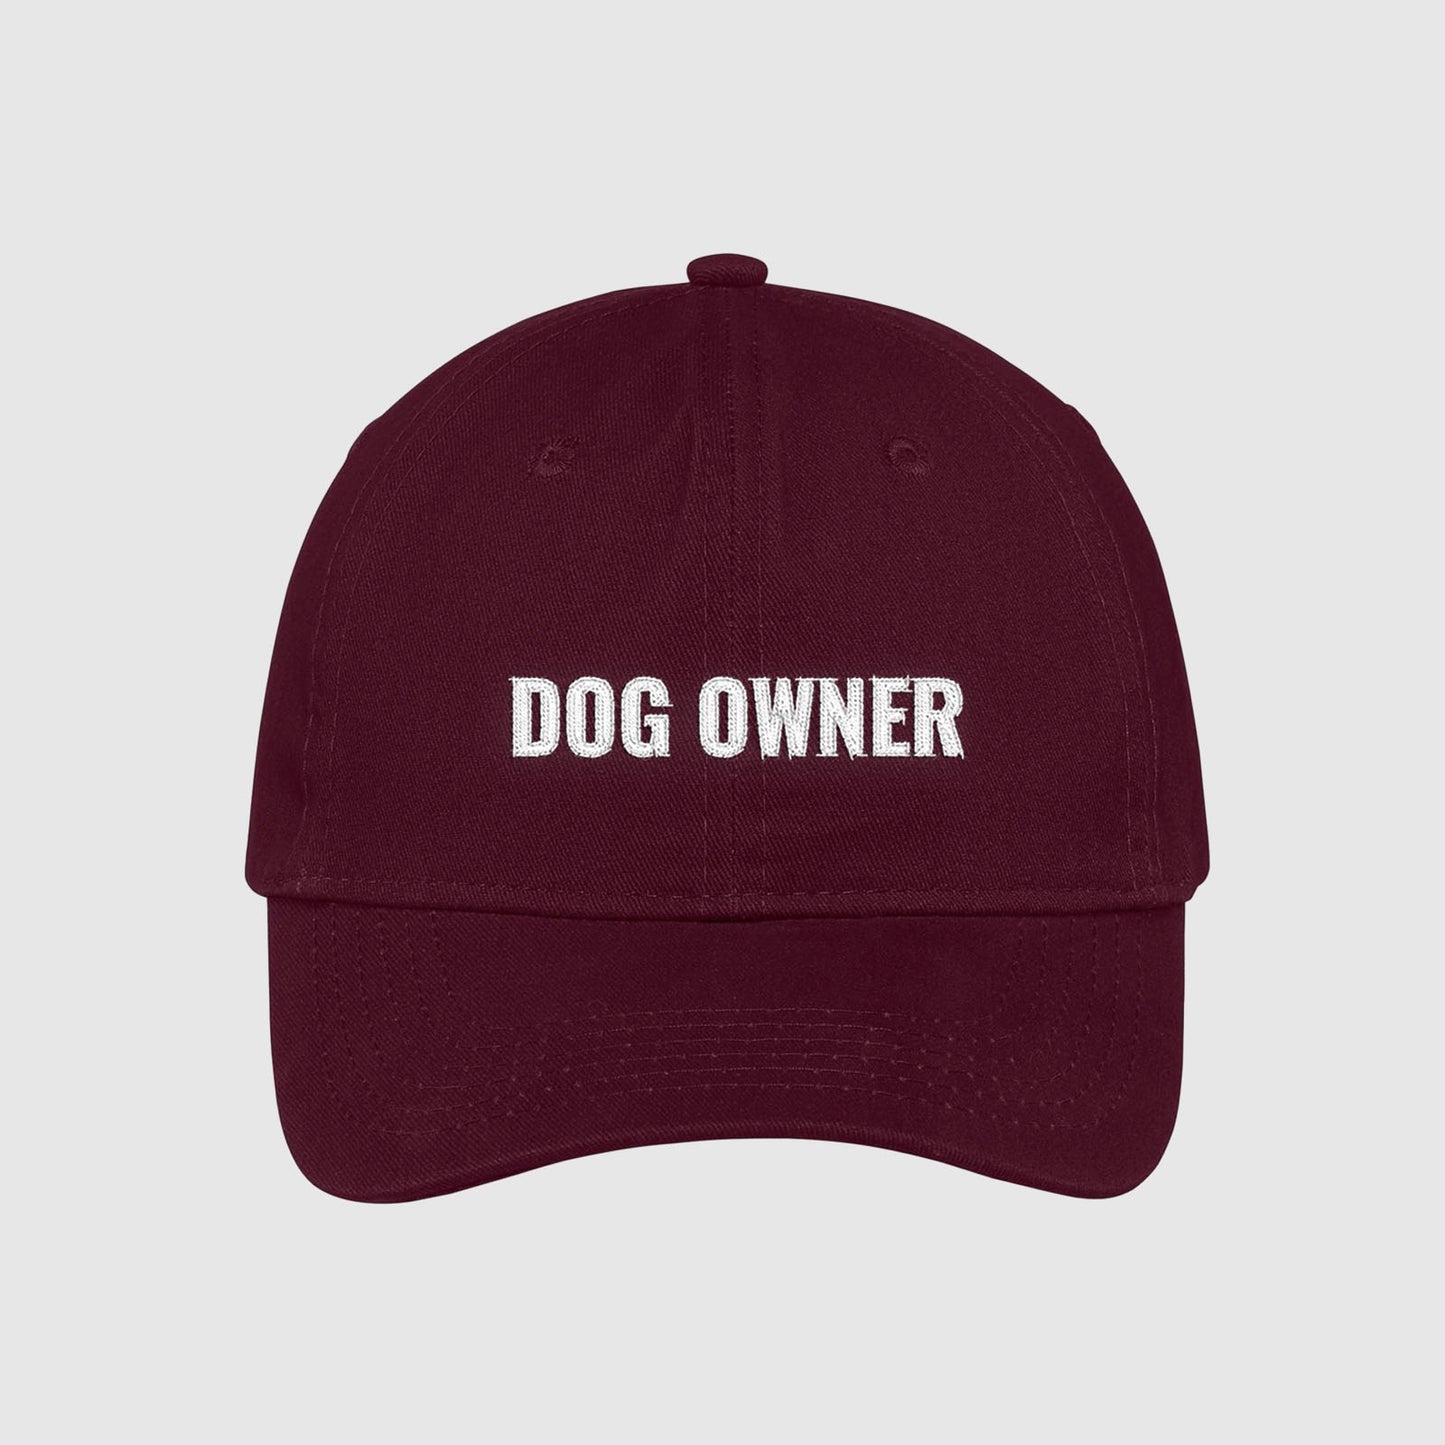 Maroon dad hat with Dog Owner embroidered on the front with white thread.